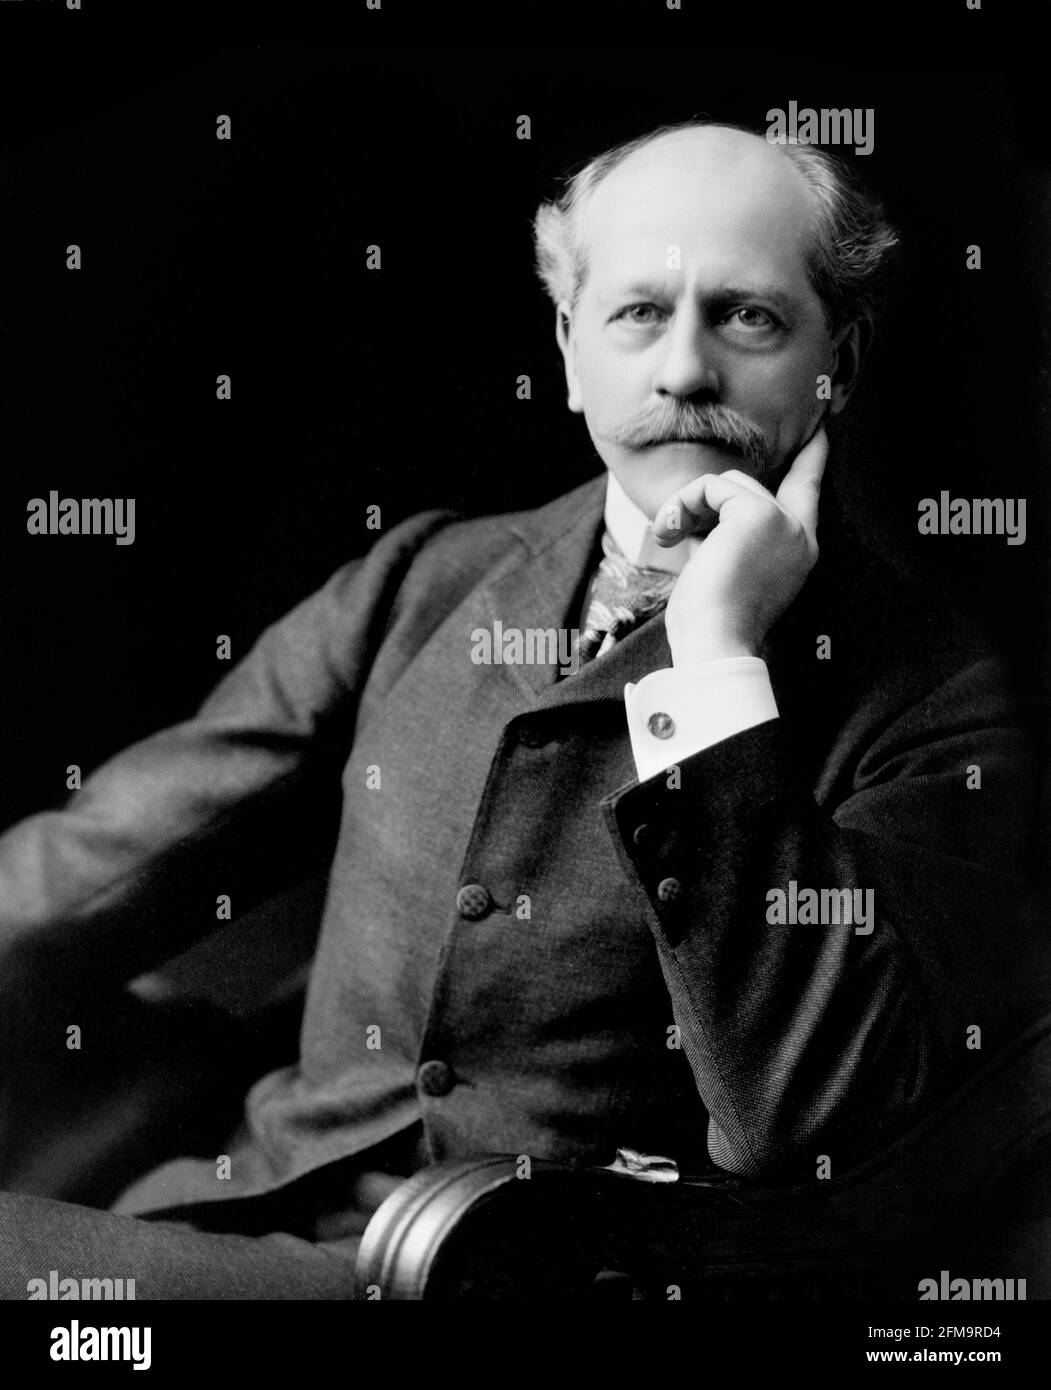 Percival Lowell. Portrait of the American businessman and astronomer, Percival Lawrence Lowell (1855-1916), c. 1904 Stock Photo